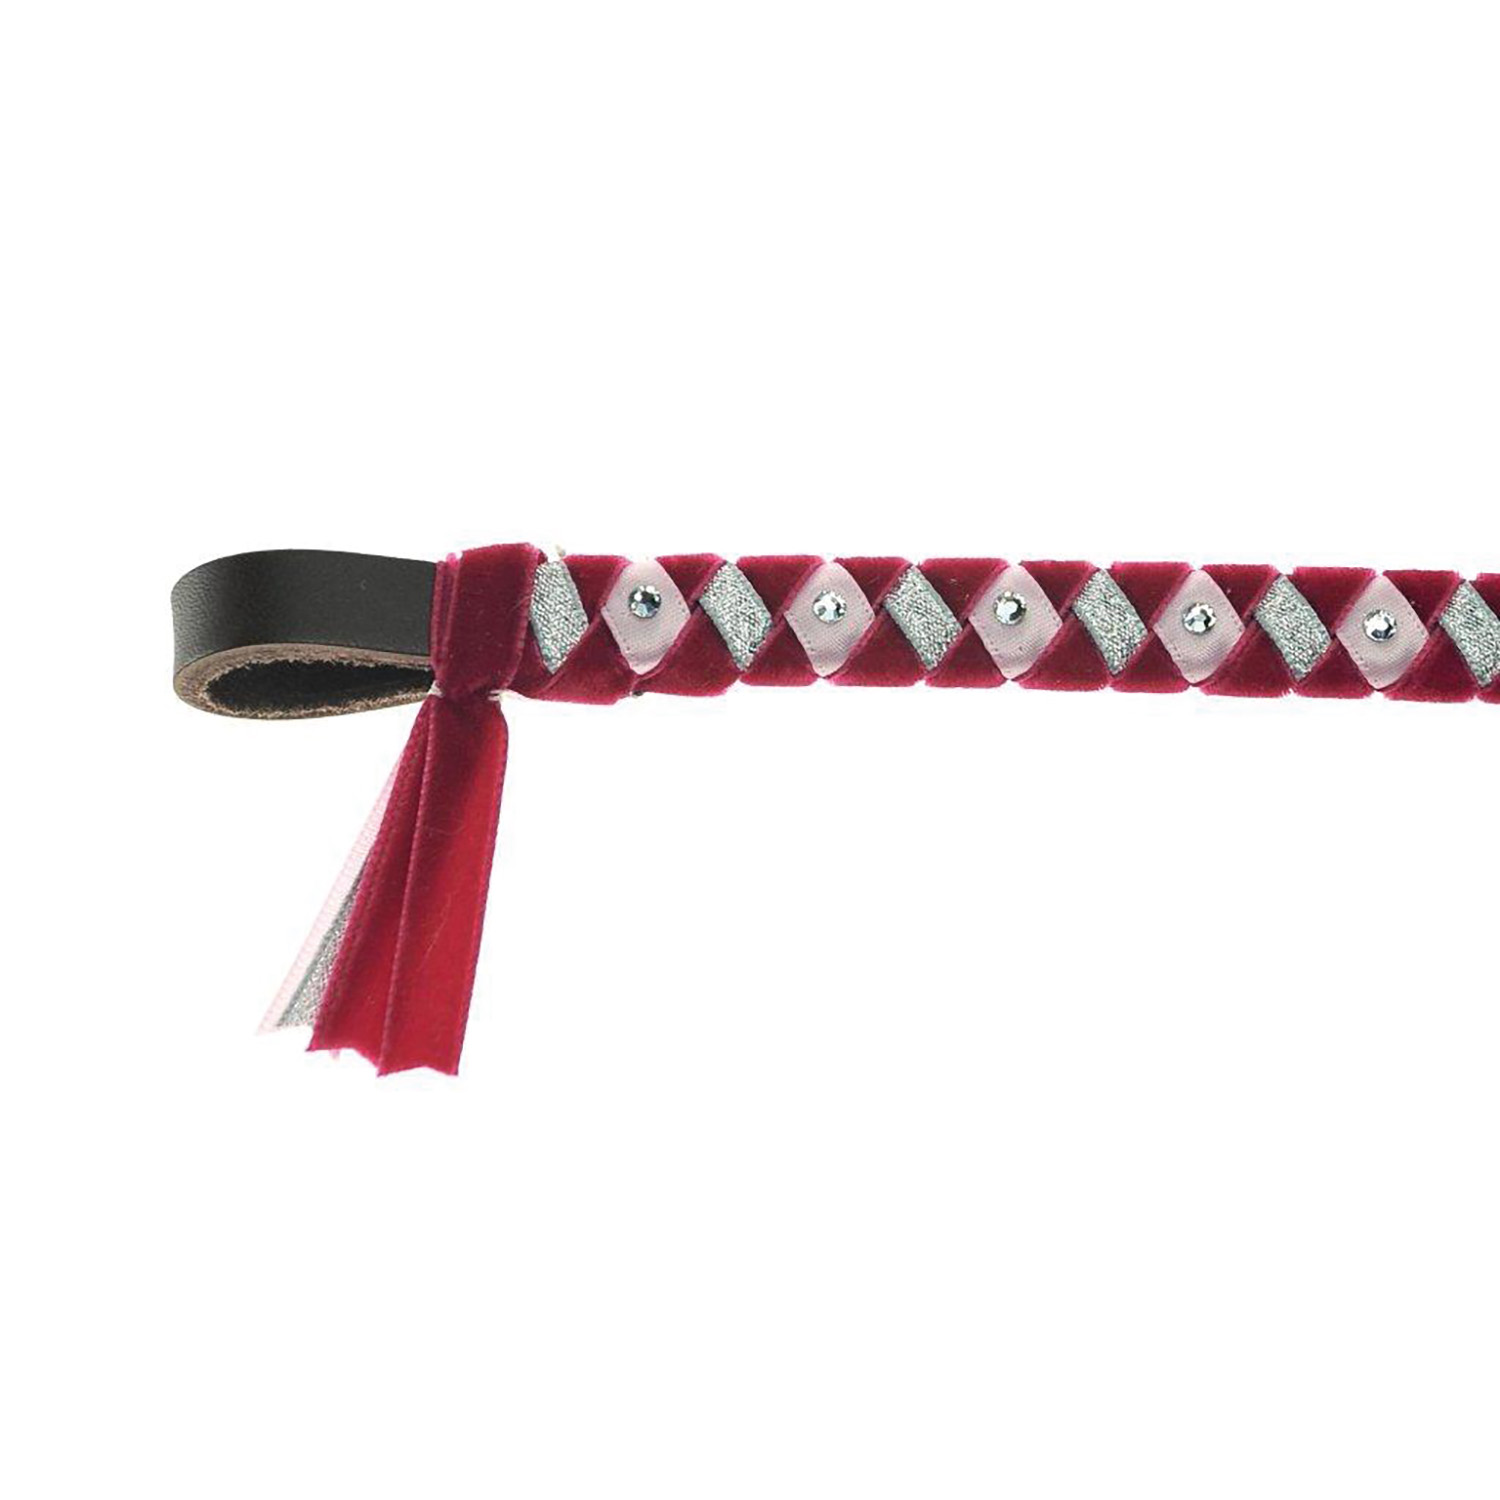 SHOWQUEST BROWBAND YORK PONY CERISE/PALE PINK/SILVER  PONY